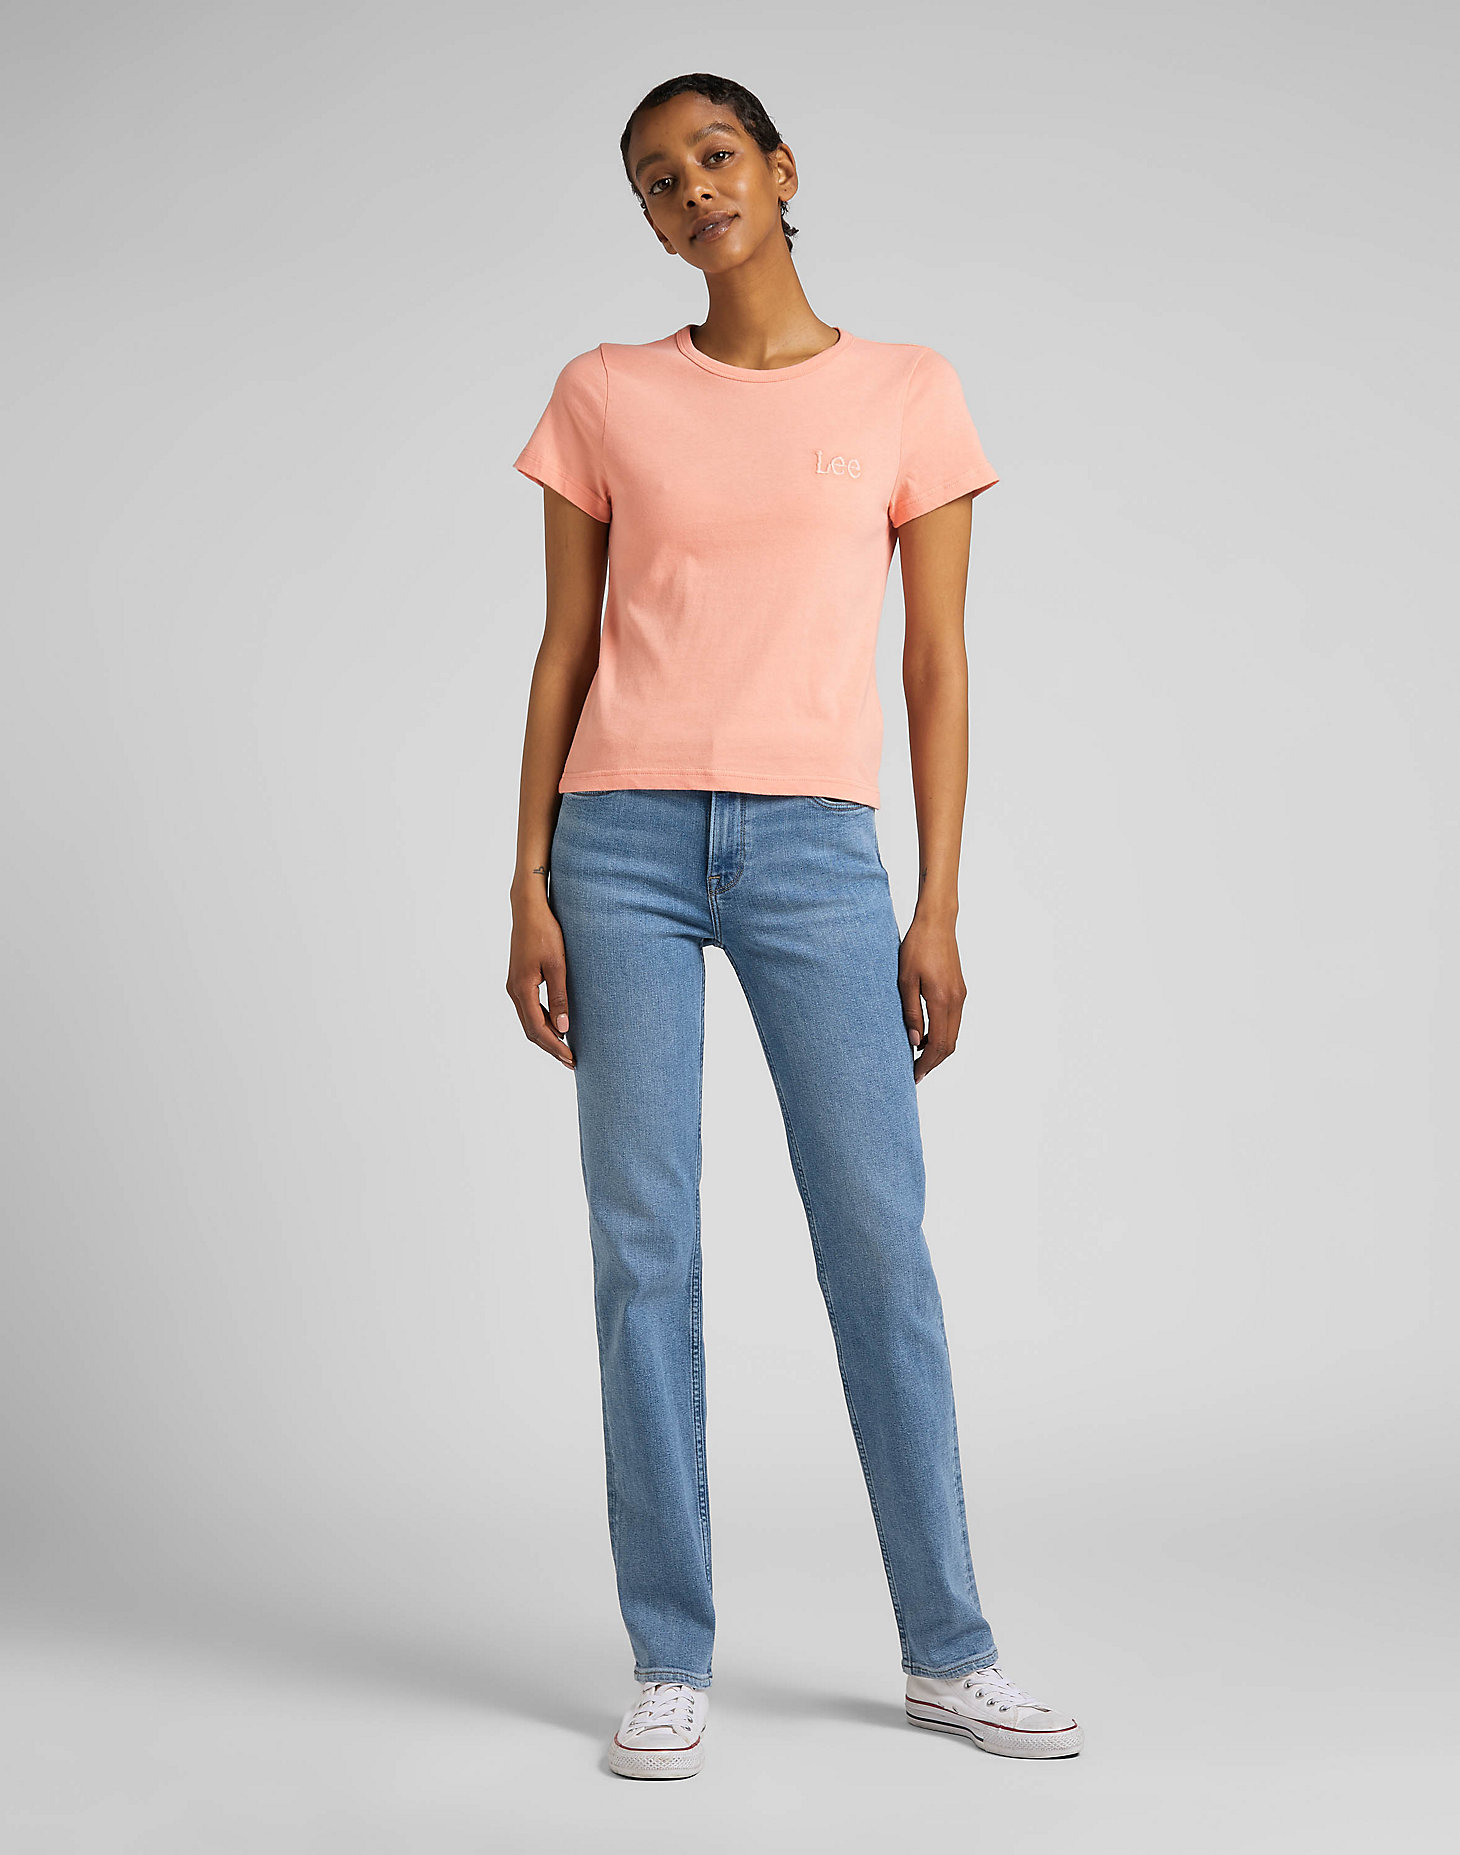 Slim Cropped Tee in Bright Coral alternative view 2